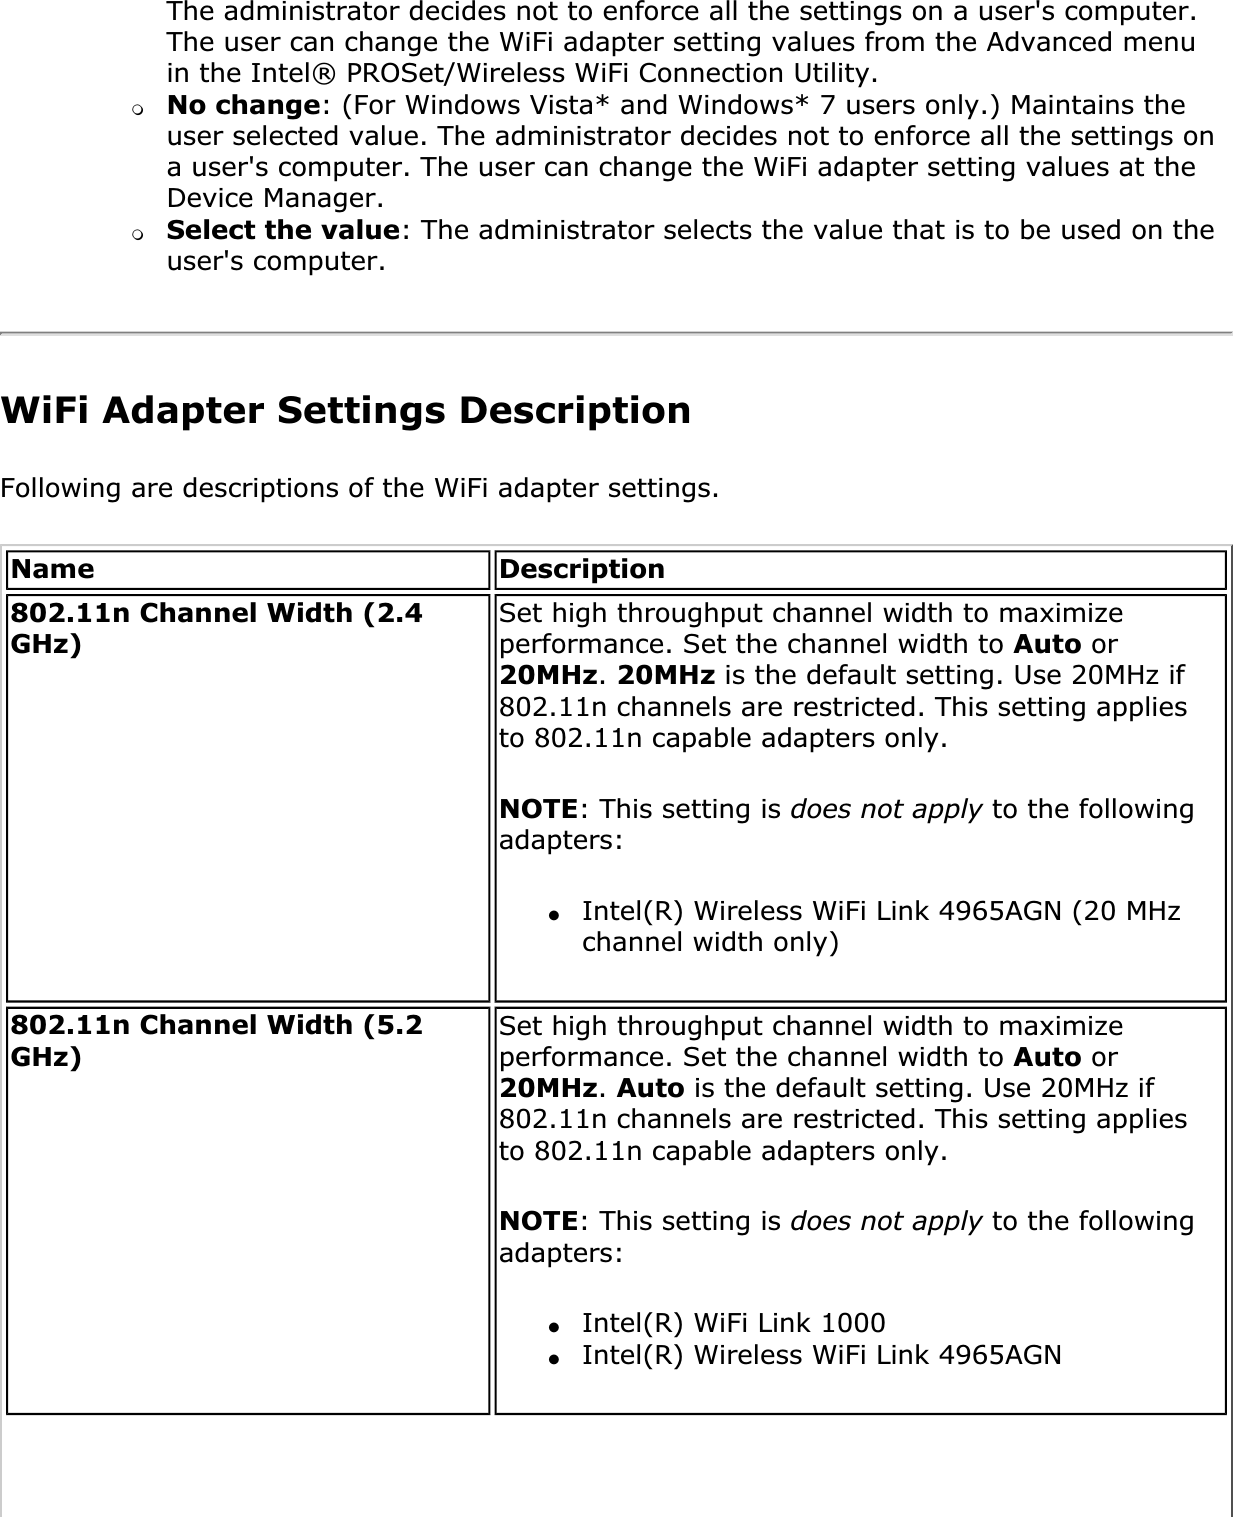 The administrator decides not to enforce all the settings on a user&apos;s computer. The user can change the WiFi adapter setting values from the Advanced menu in the Intel® PROSet/Wireless WiFi Connection Utility.❍No change: (For Windows Vista* and Windows* 7 users only.) Maintains the user selected value. The administrator decides not to enforce all the settings on a user&apos;s computer. The user can change the WiFi adapter setting values at the Device Manager.❍Select the value: The administrator selects the value that is to be used on the user&apos;s computer.WiFi Adapter Settings DescriptionFollowing are descriptions of the WiFi adapter settings. Name Description802.11n Channel Width (2.4 GHz)Set high throughput channel width to maximize performance. Set the channel width to Auto or 20MHz.20MHz is the default setting. Use 20MHz if 802.11n channels are restricted. This setting applies to 802.11n capable adapters only. NOTE: This setting is does not apply to the following adapters:●Intel(R) Wireless WiFi Link 4965AGN (20 MHz channel width only) 802.11n Channel Width (5.2 GHz)Set high throughput channel width to maximize performance. Set the channel width to Auto or 20MHz.Auto is the default setting. Use 20MHz if 802.11n channels are restricted. This setting applies to 802.11n capable adapters only. NOTE: This setting is does not apply to the following adapters:●Intel(R) WiFi Link 1000●Intel(R) Wireless WiFi Link 4965AGN